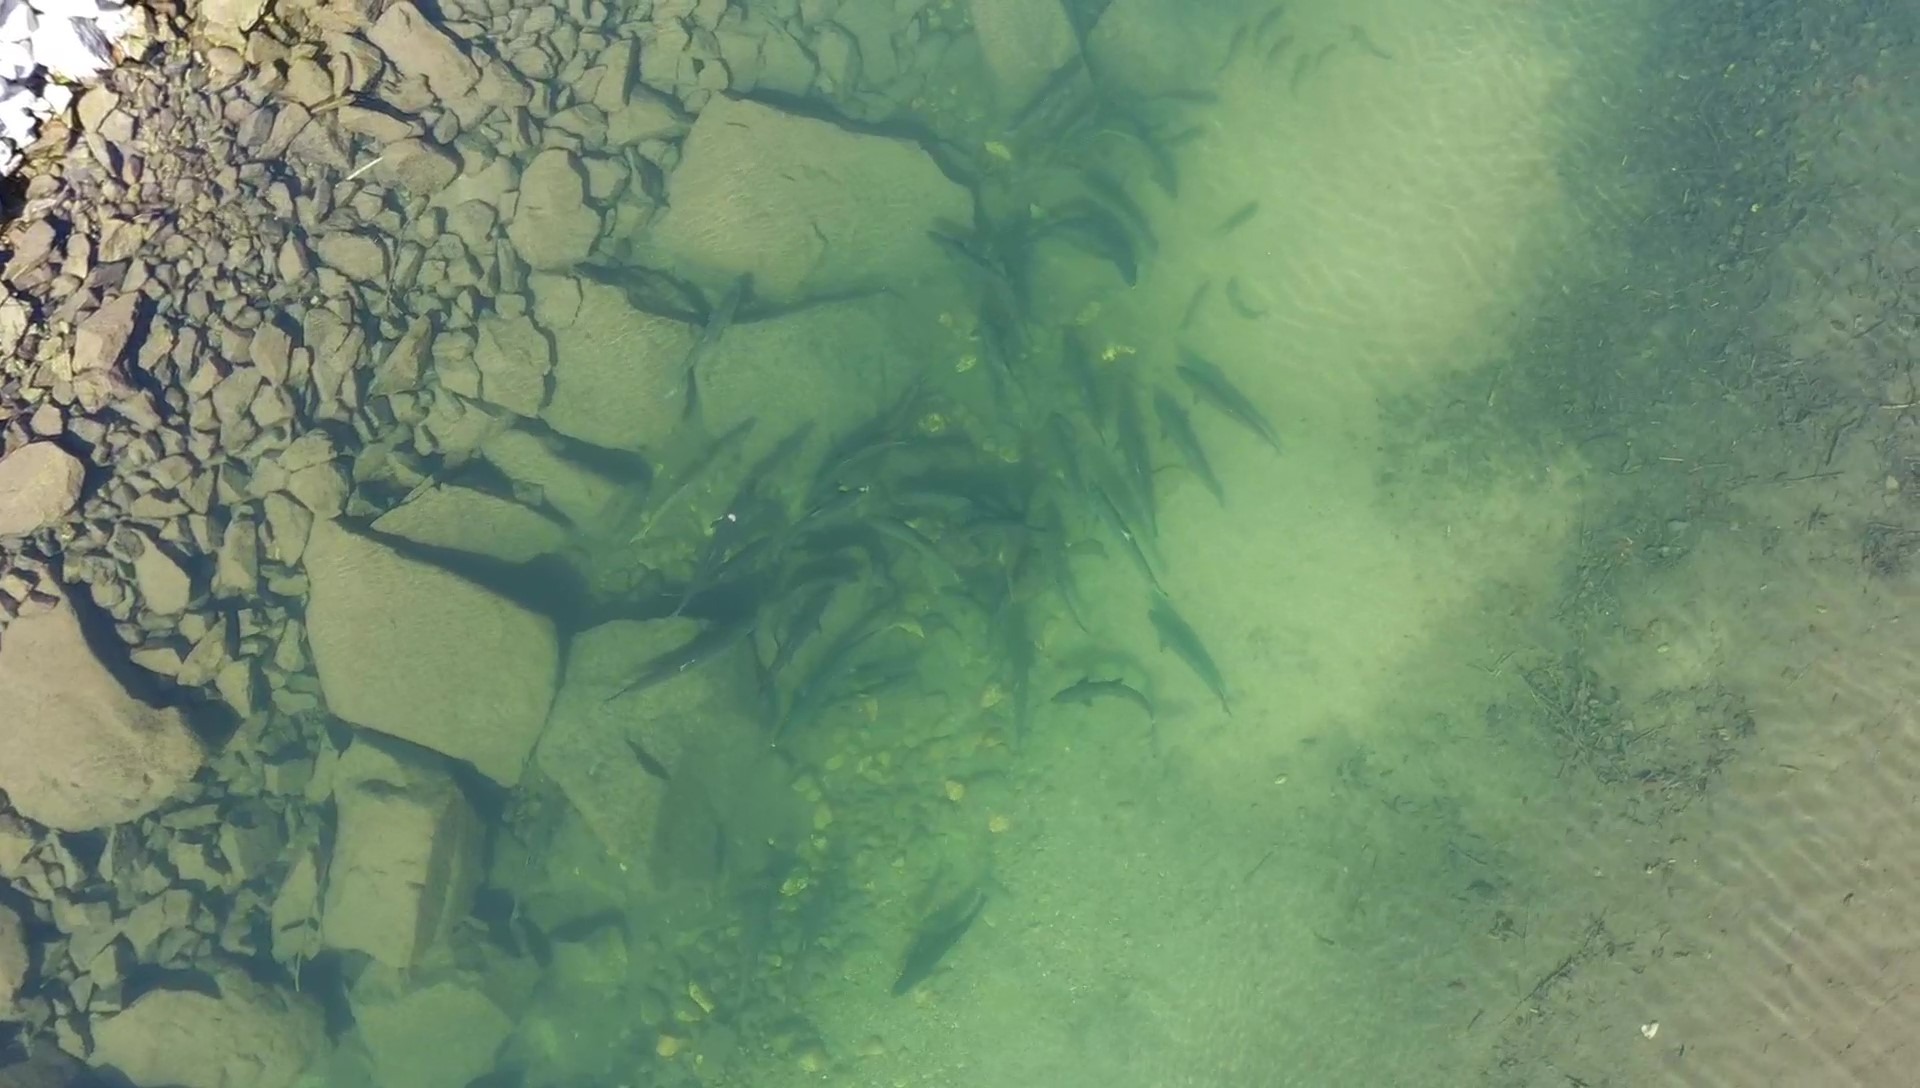 Salmon redds, or nests, have been found in the Upper Columbia River in fall 2020, including in the Sanpoil River tributary area above Grand Coulee Dam.